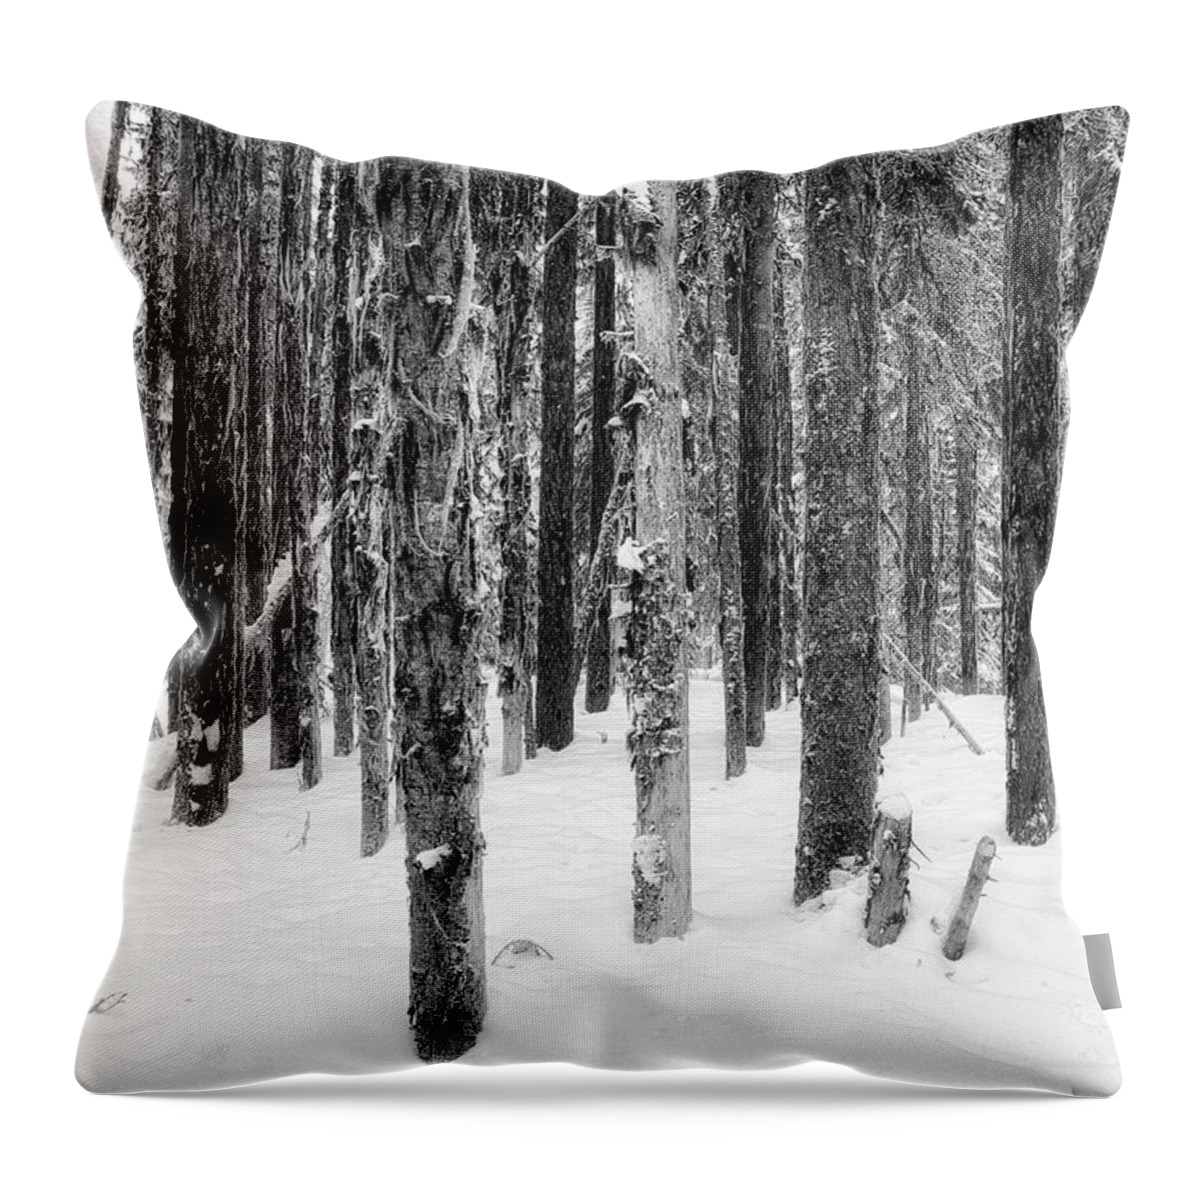 Black And White Photography Throw Pillow featuring the photograph Snowy Trees Uniquely the Same by Allan Van Gasbeck